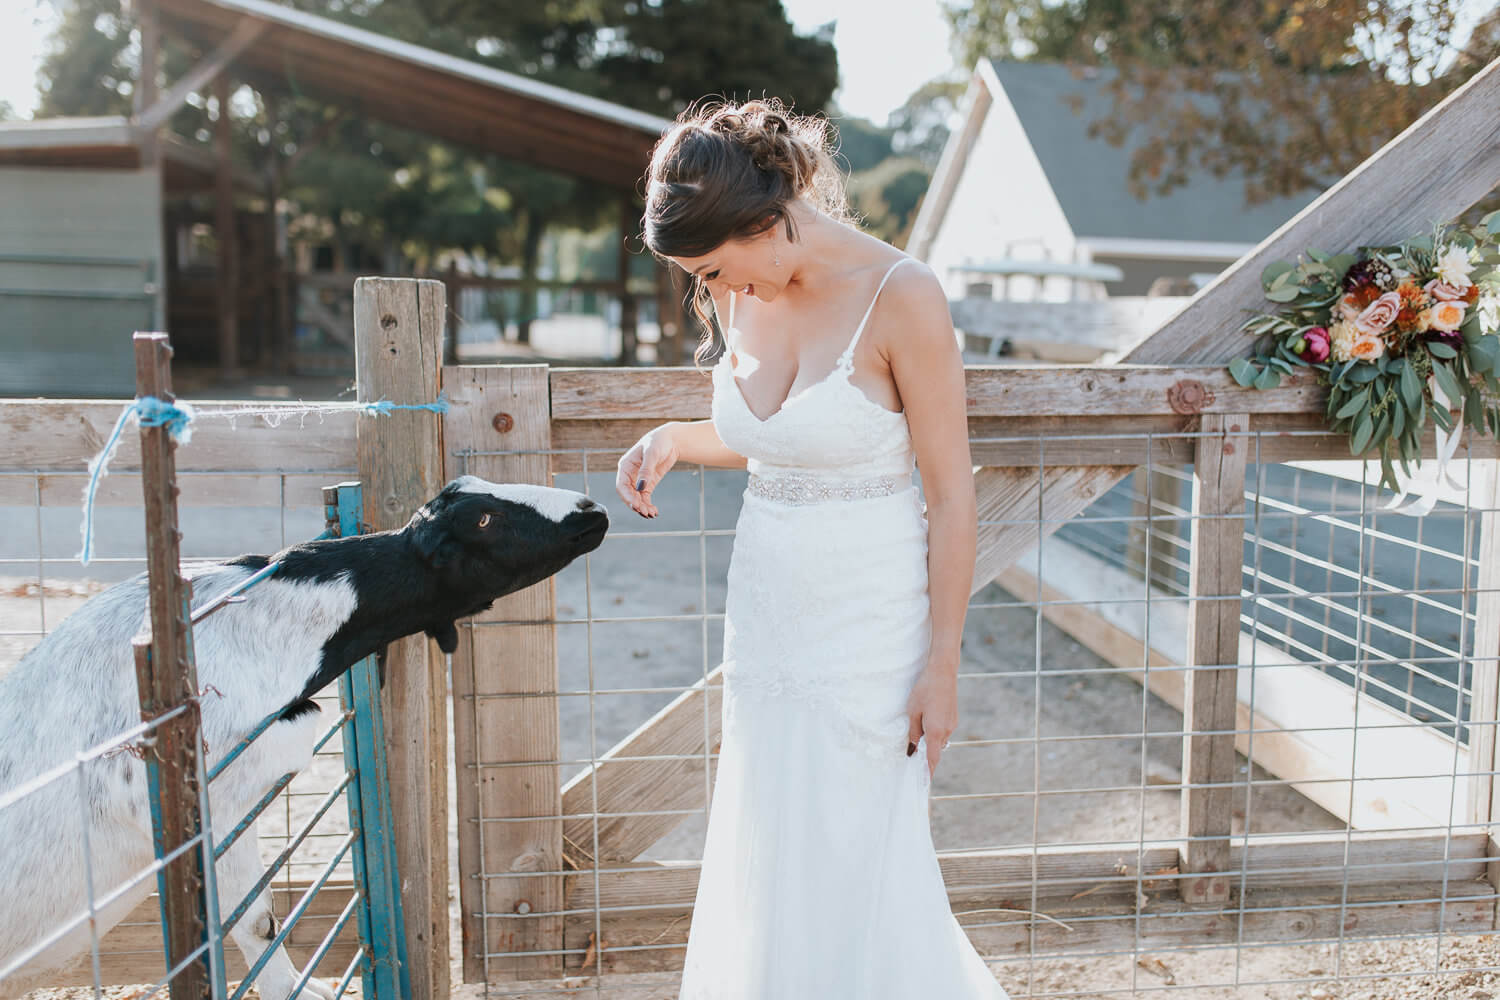 Bridal and wedding styled shoot at Ardenwood Farms in Fremont California. Vintage details, flower ideas, natural light photography, animal photography, farm photoshoot.